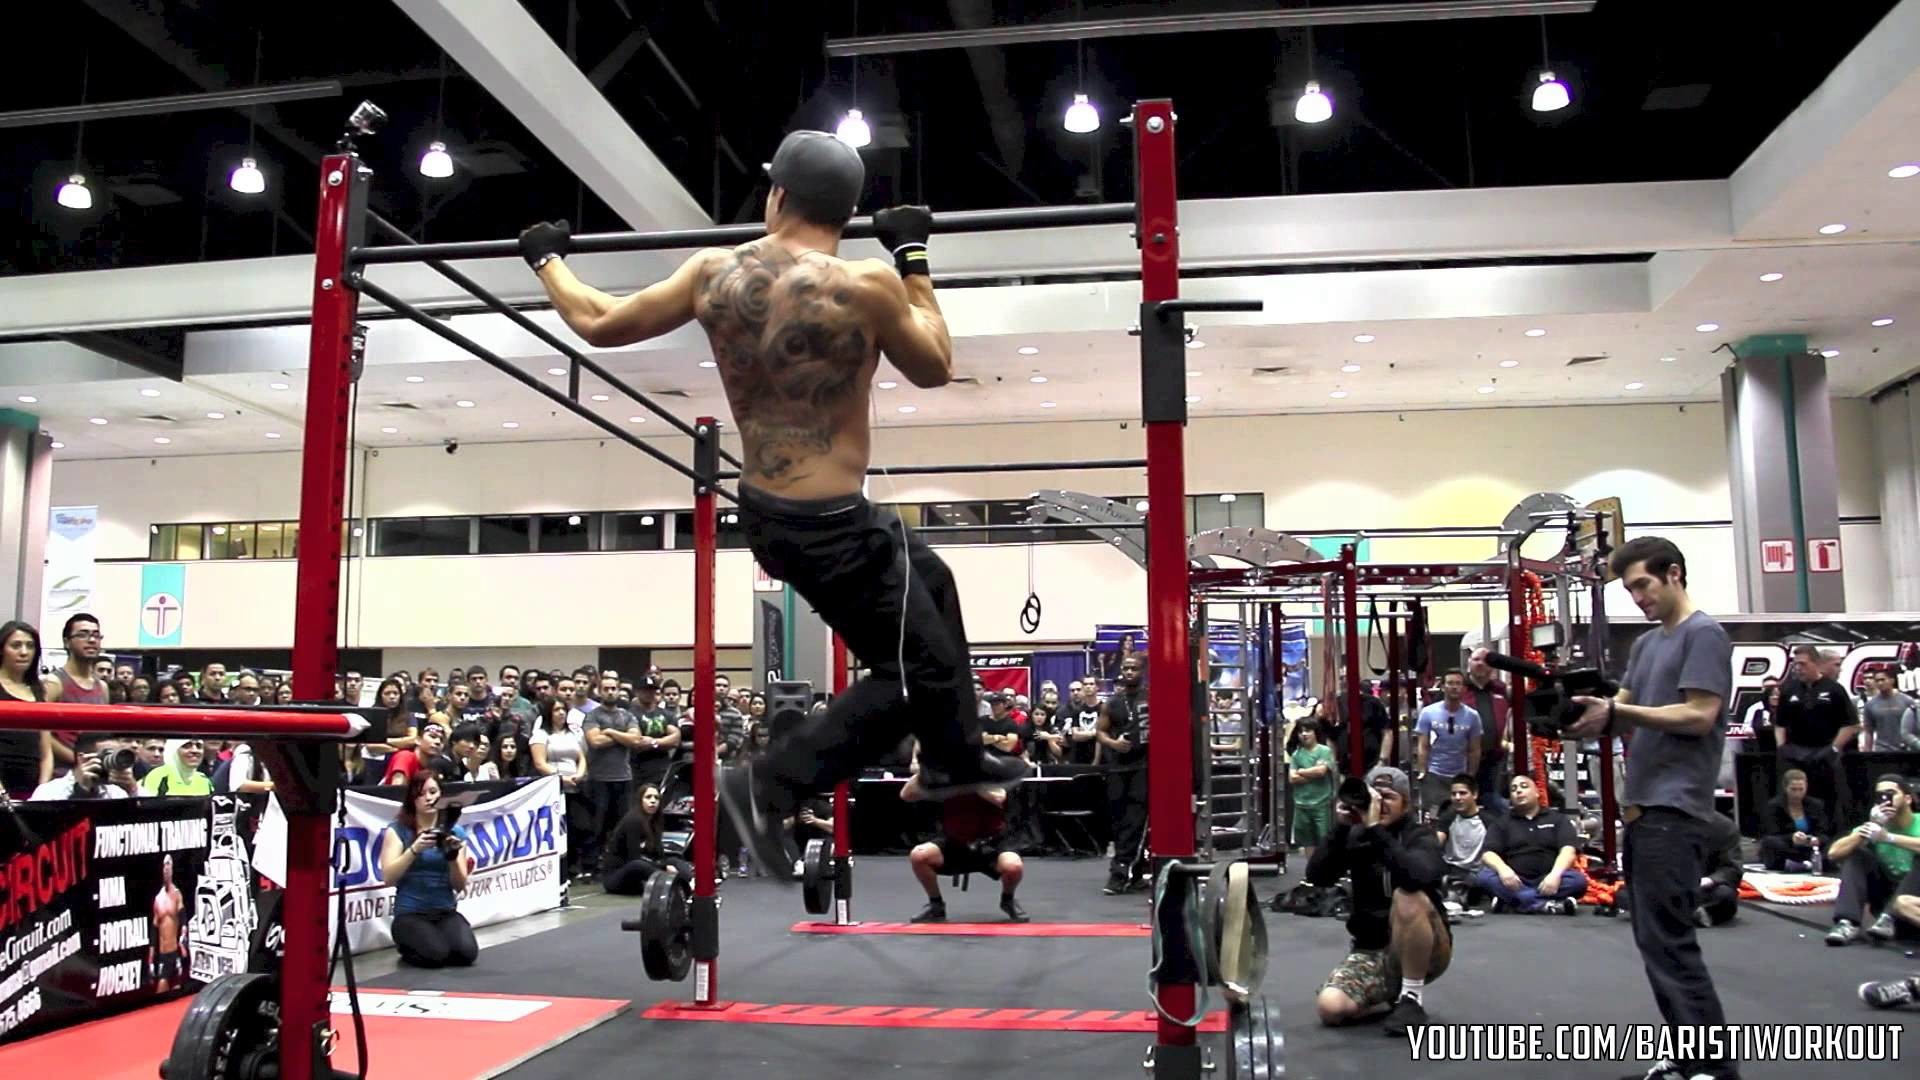 1920x1080 Battle of the Bars - Los Angeles Fit Expo 2013 Freestyle Calisthenics  Contest - YouTube